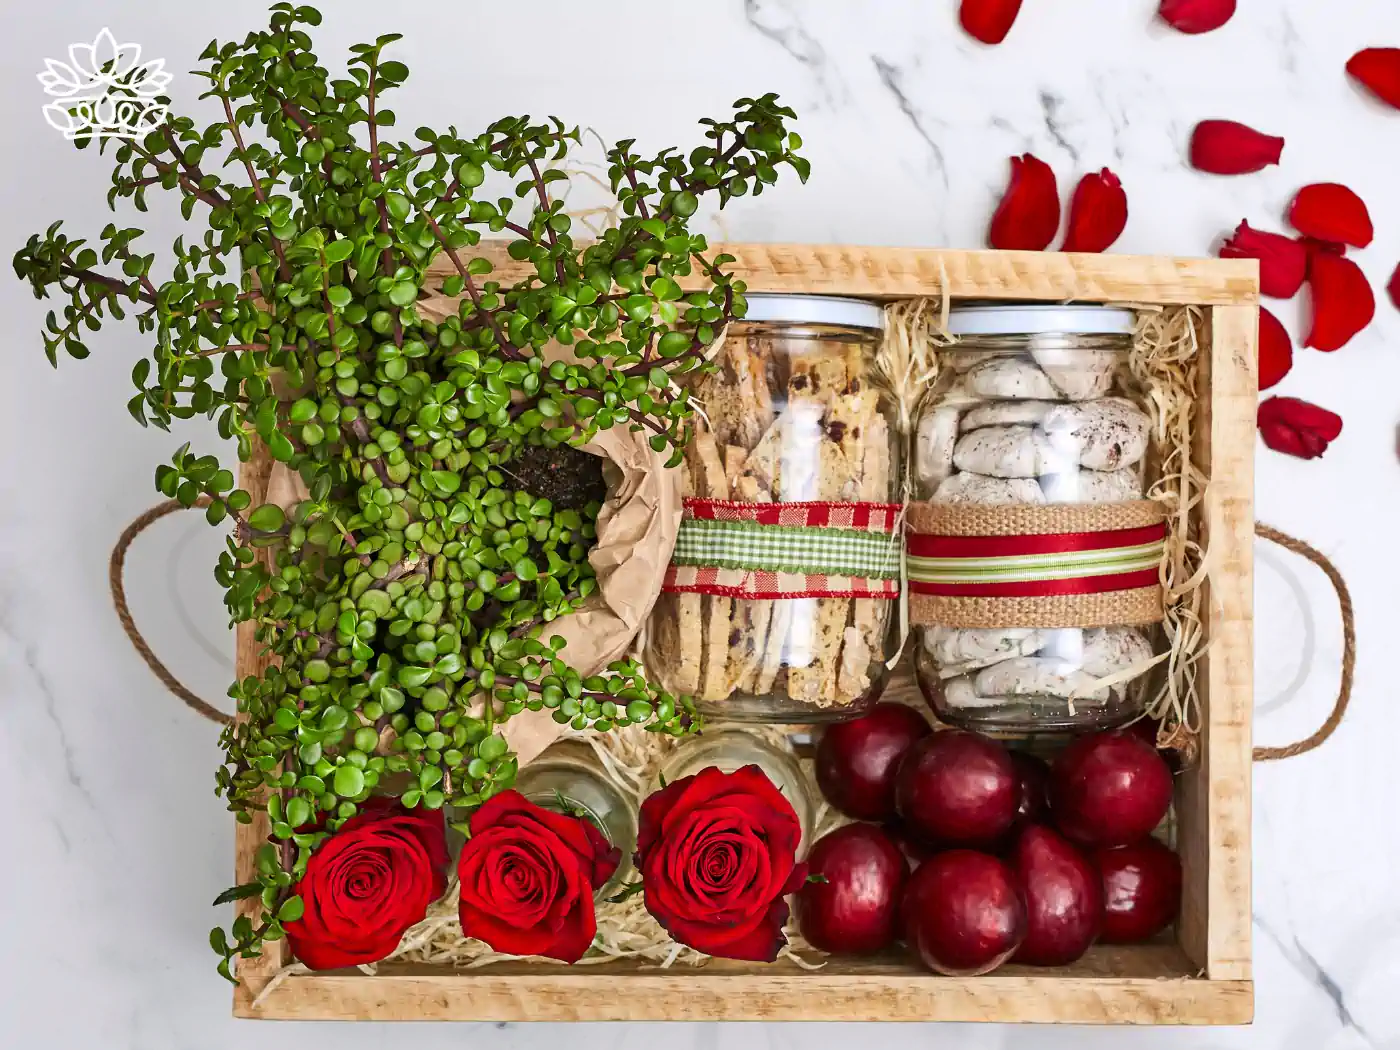 A delightful wooden gift box with jars of cookies, fresh red apples, vibrant roses, and a lush plant, offering a unique gift box for mum. Delivered with heart. Fabulous Flowers and Gifts.